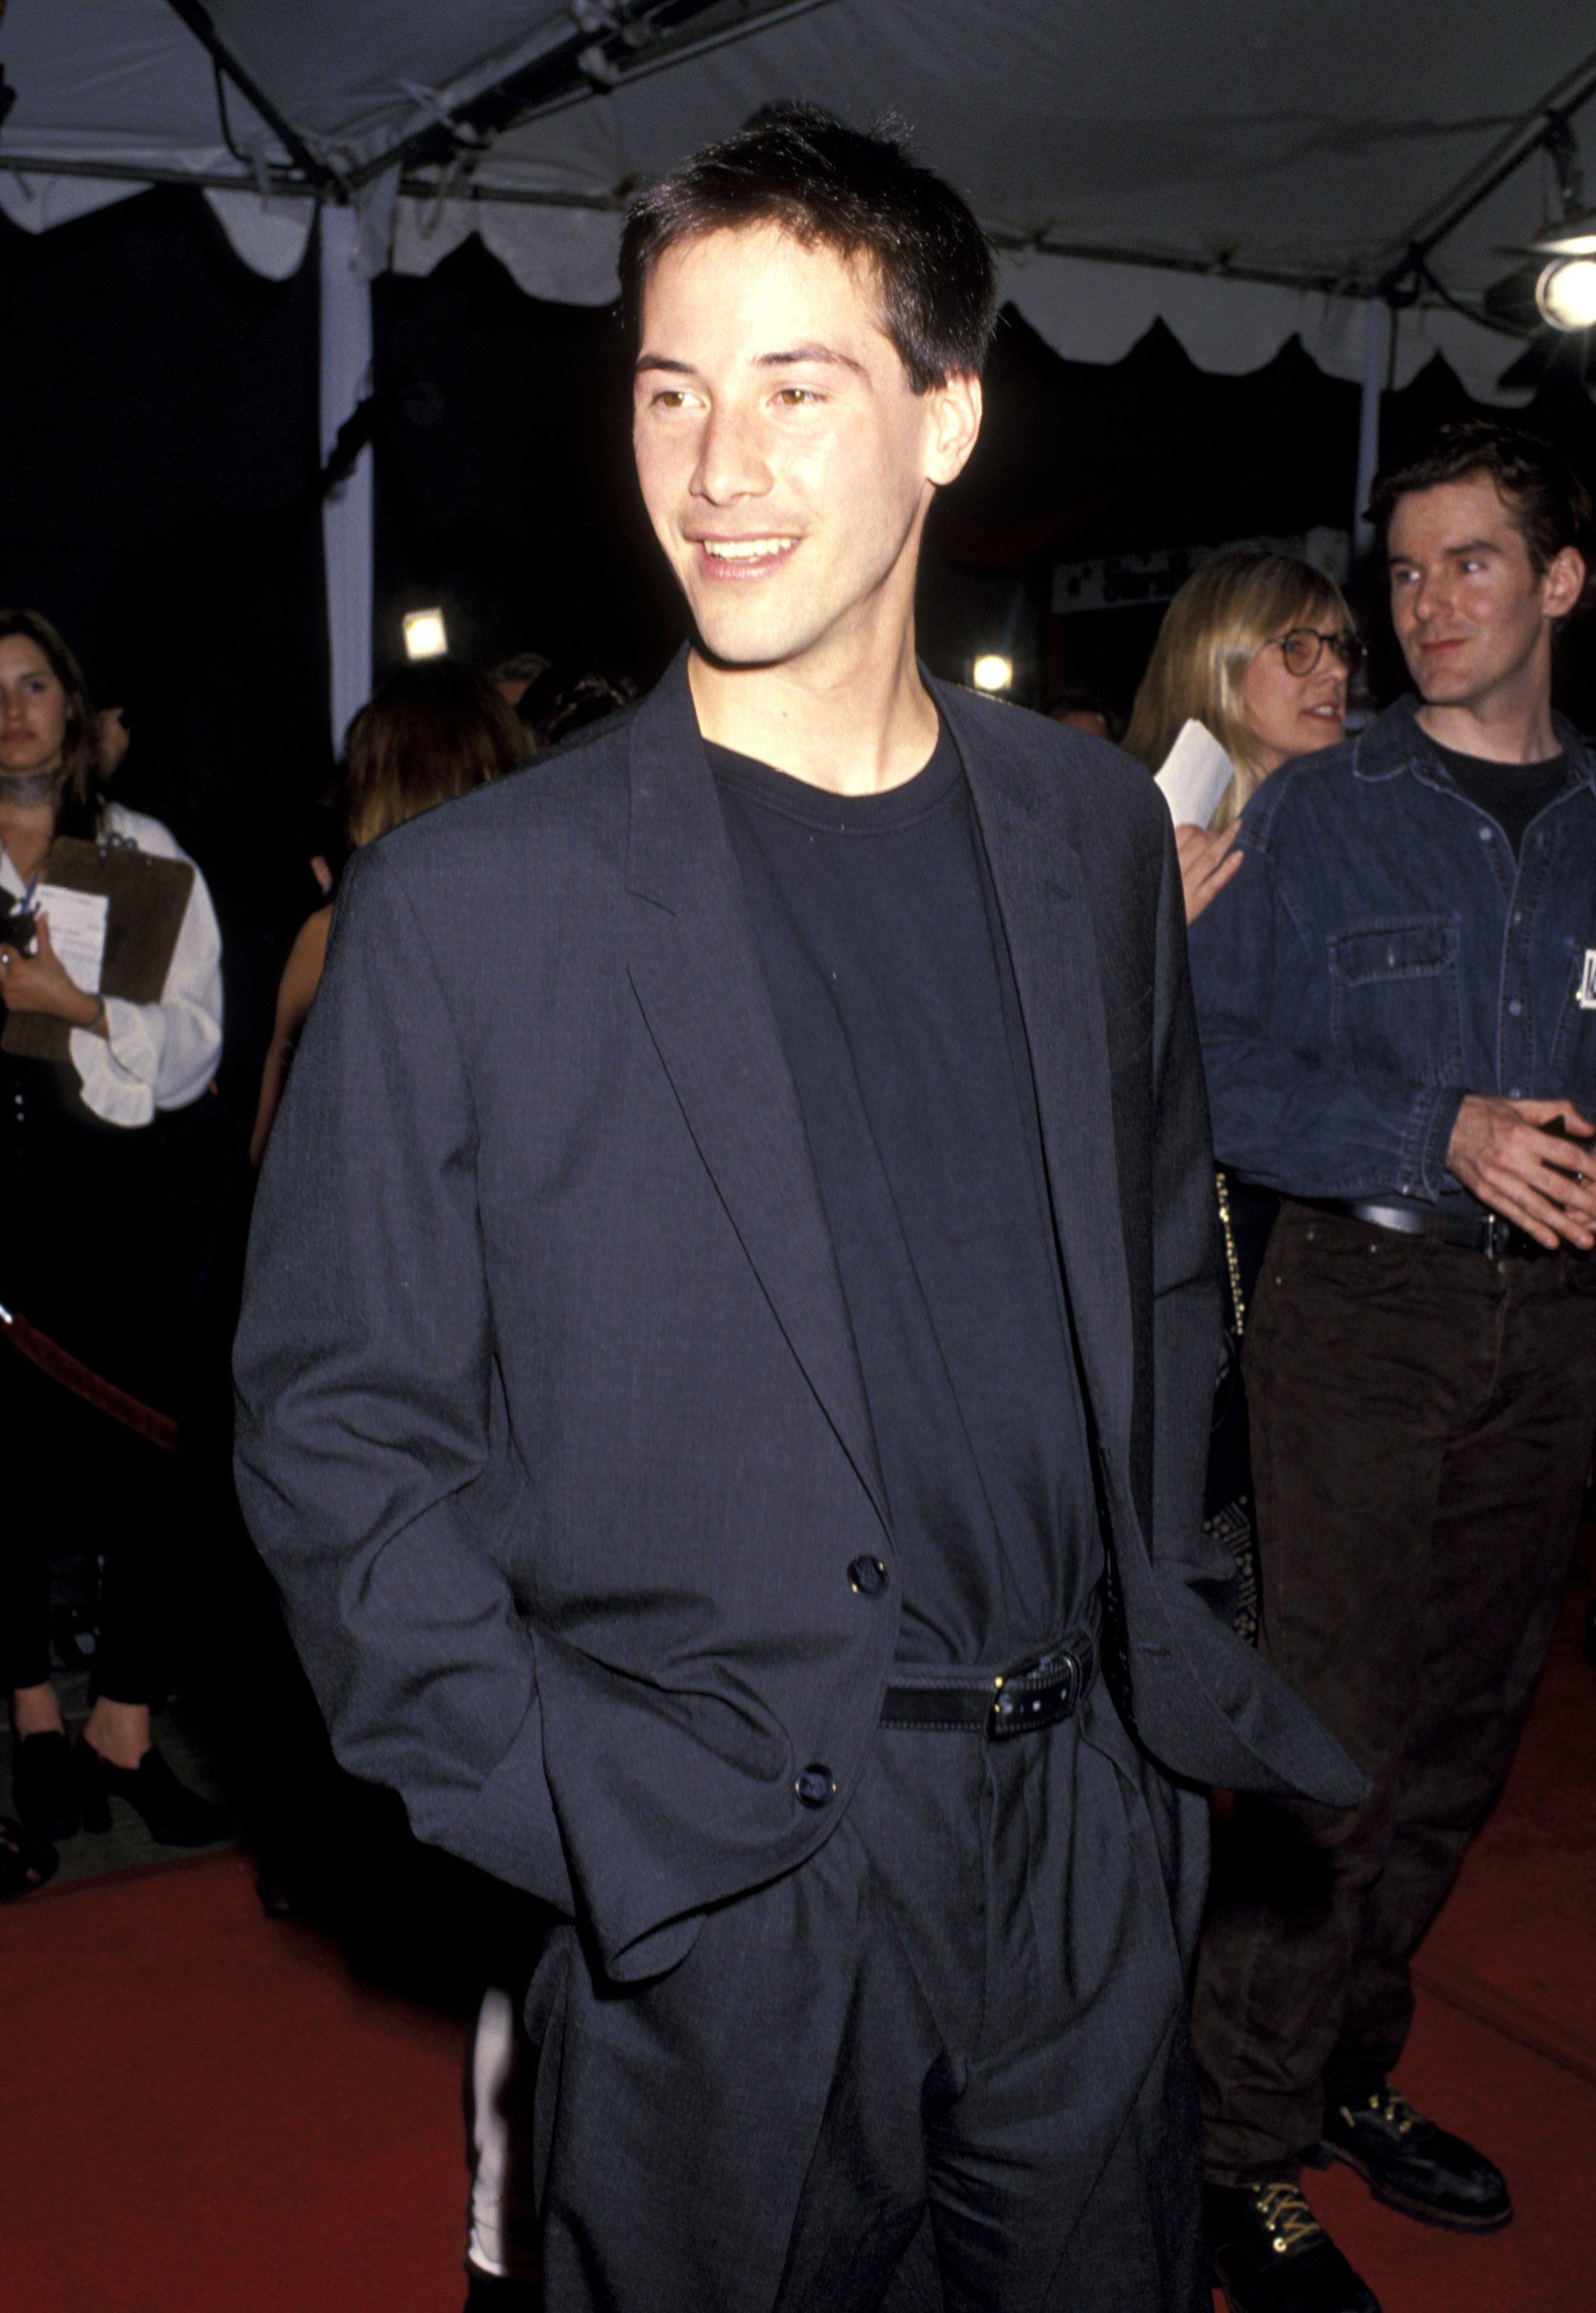 Keanu Reeves during the Los Angeles premiere of "Speed" at Mann's Chinese Theater in Hollywood, California | Source: Getty Images